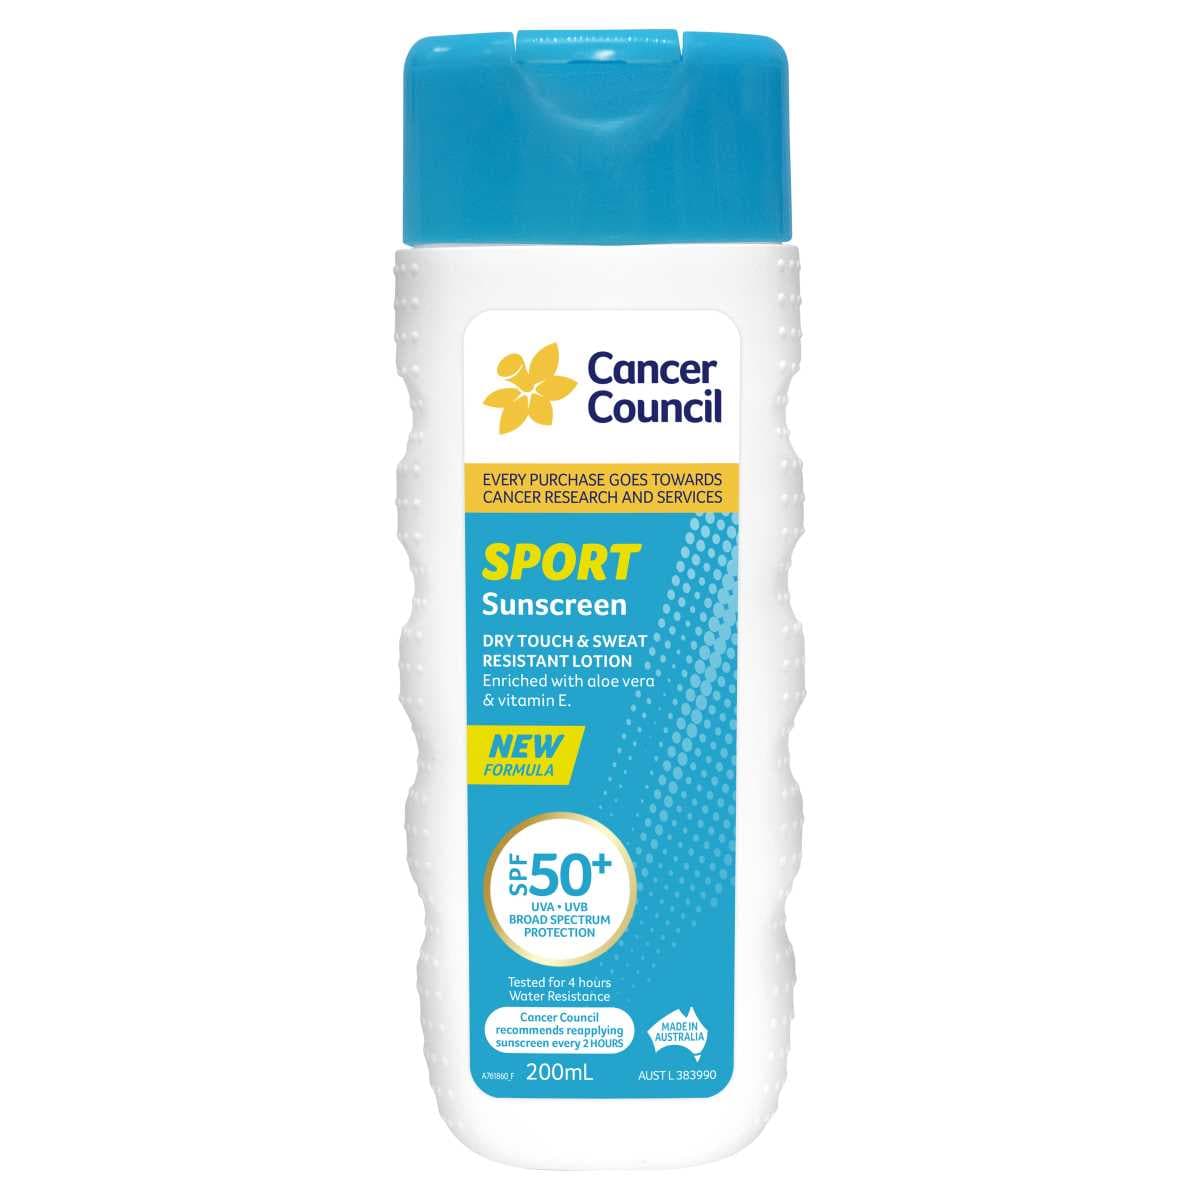 Cancer Council Sunscreen Sport Dry Touch & Sweat Resistant Lotion SPF50+ 200ml